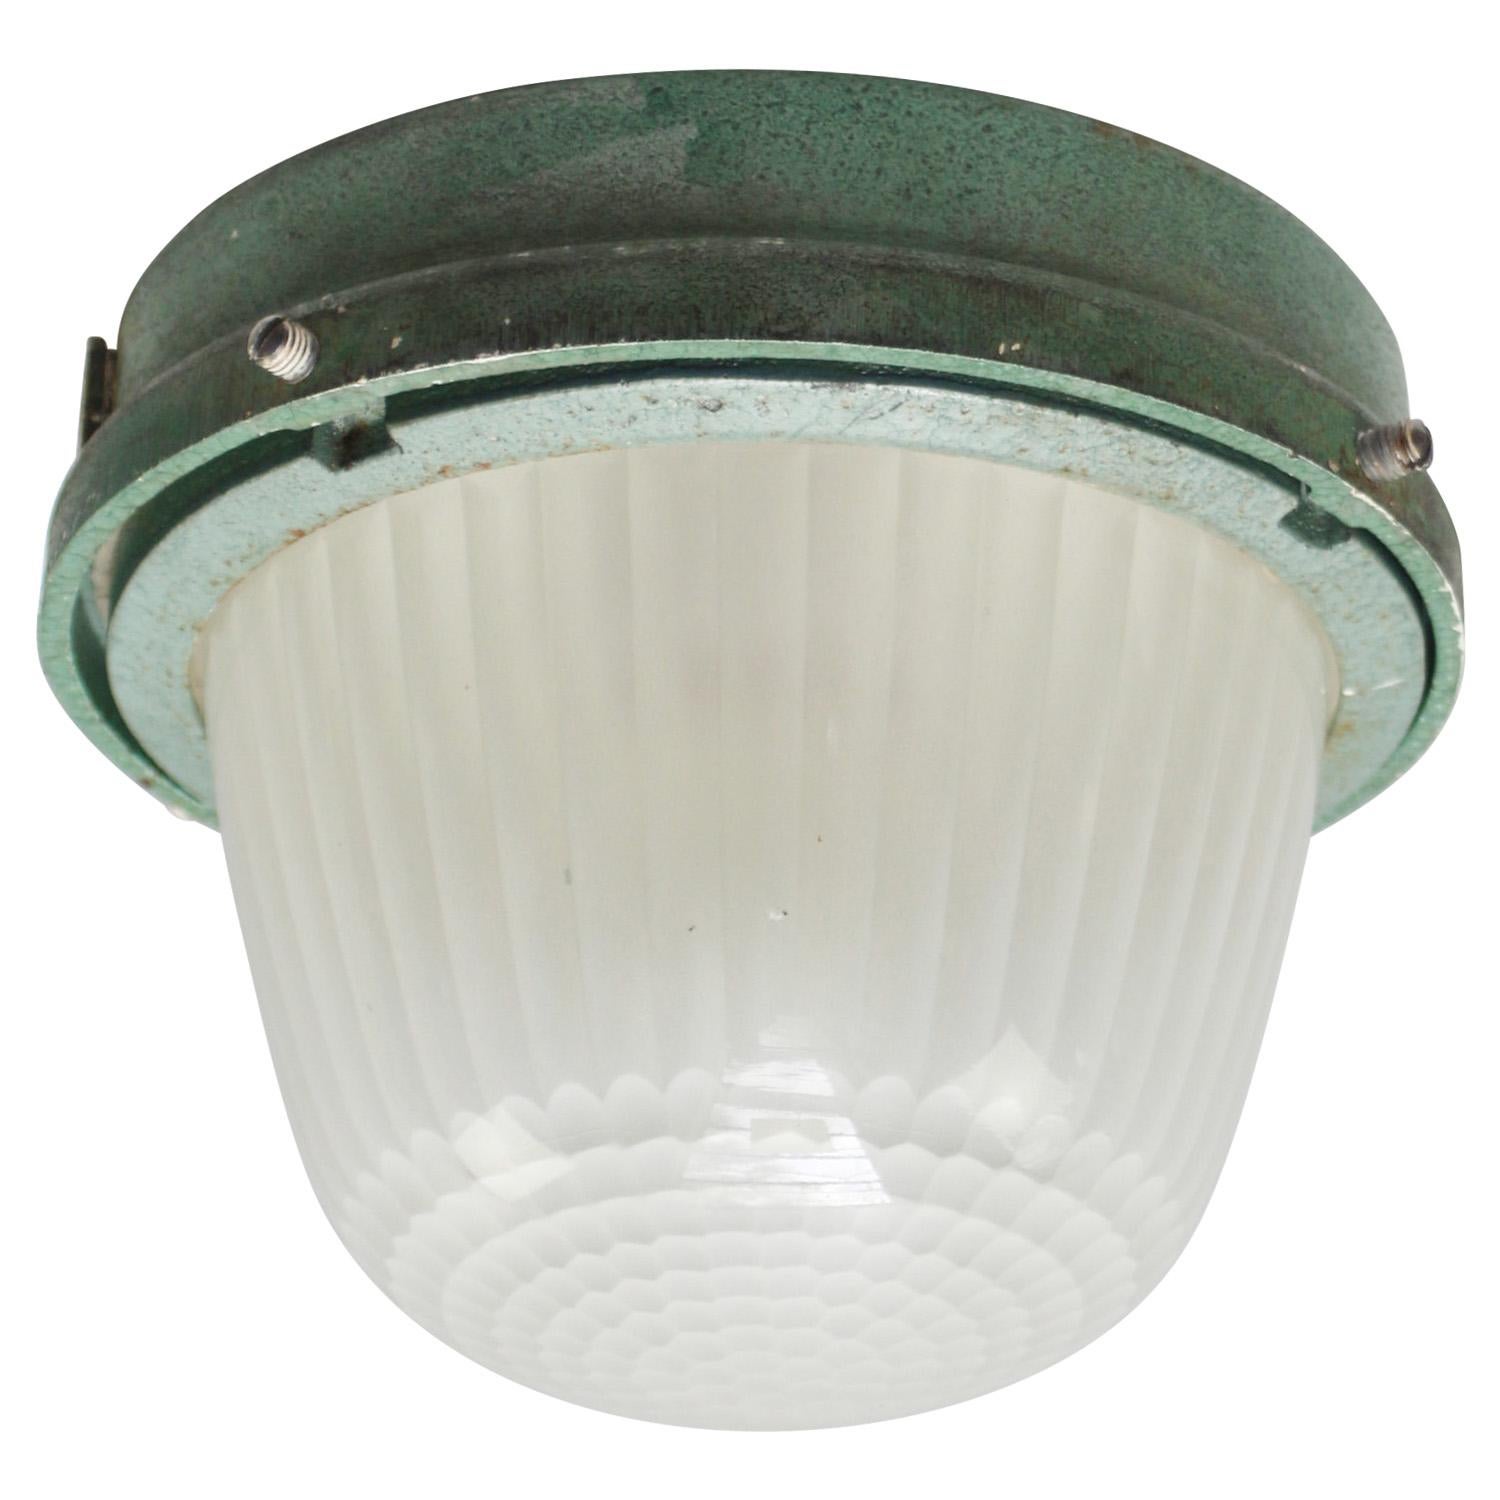 French Industrial wall / ceiling lamp by Holophane, France, model CE100
Green cast iron with frosted cut glass.

Weight : 4.10 kg / 9 lb

Priced per individual item. All lamps have been made suitable by international standards for incandescent light